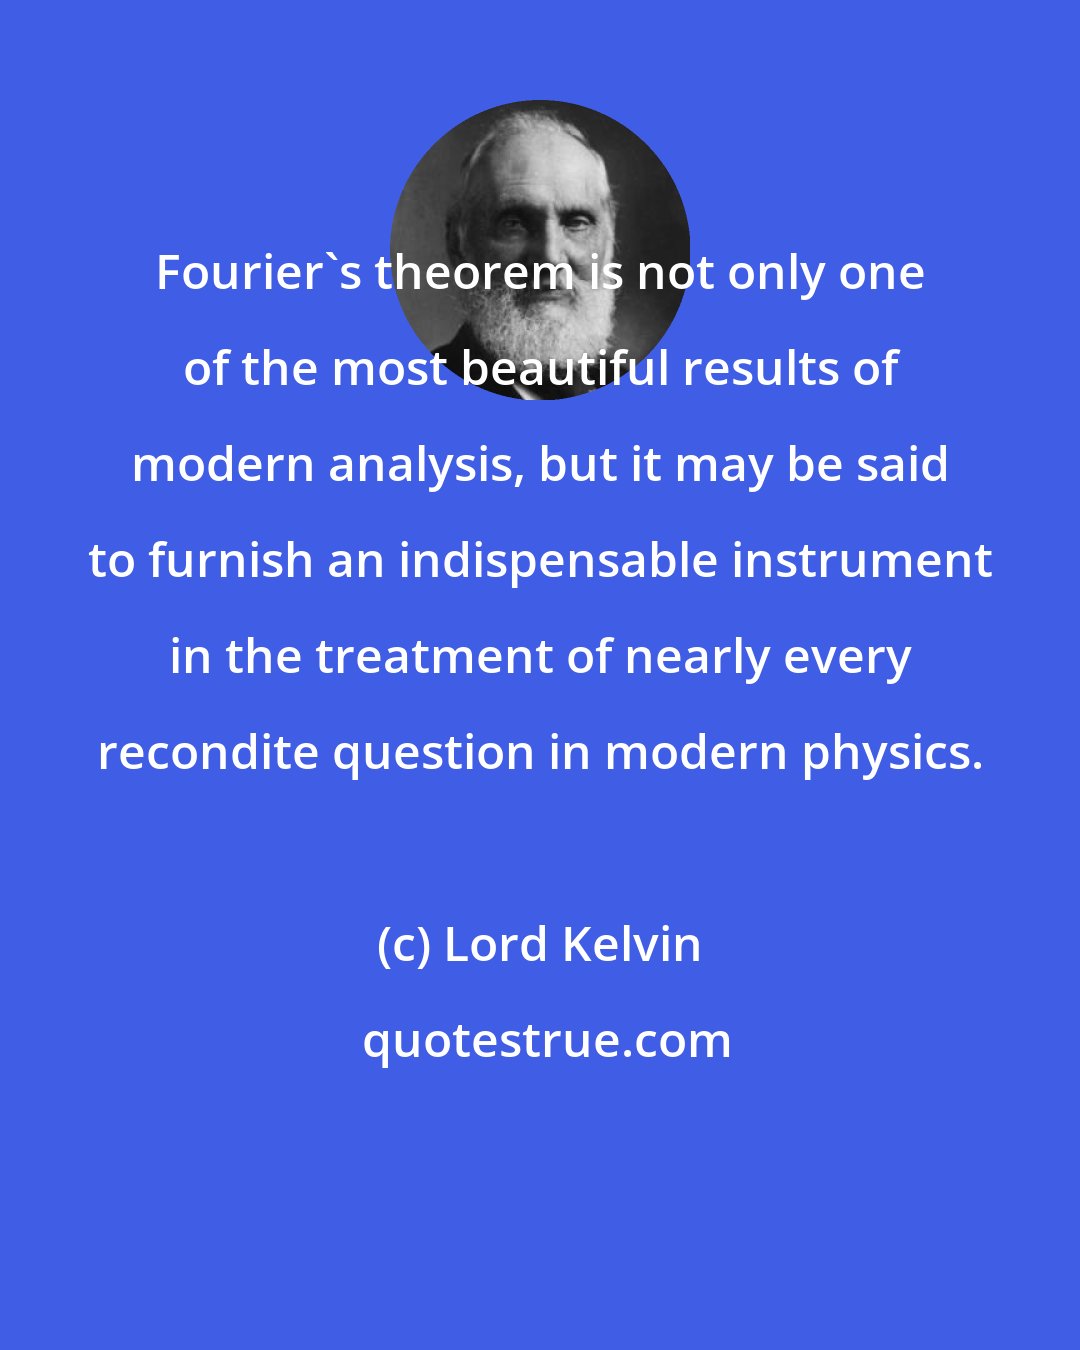 Lord Kelvin: Fourier's theorem is not only one of the most beautiful results of modern analysis, but it may be said to furnish an indispensable instrument in the treatment of nearly every recondite question in modern physics.